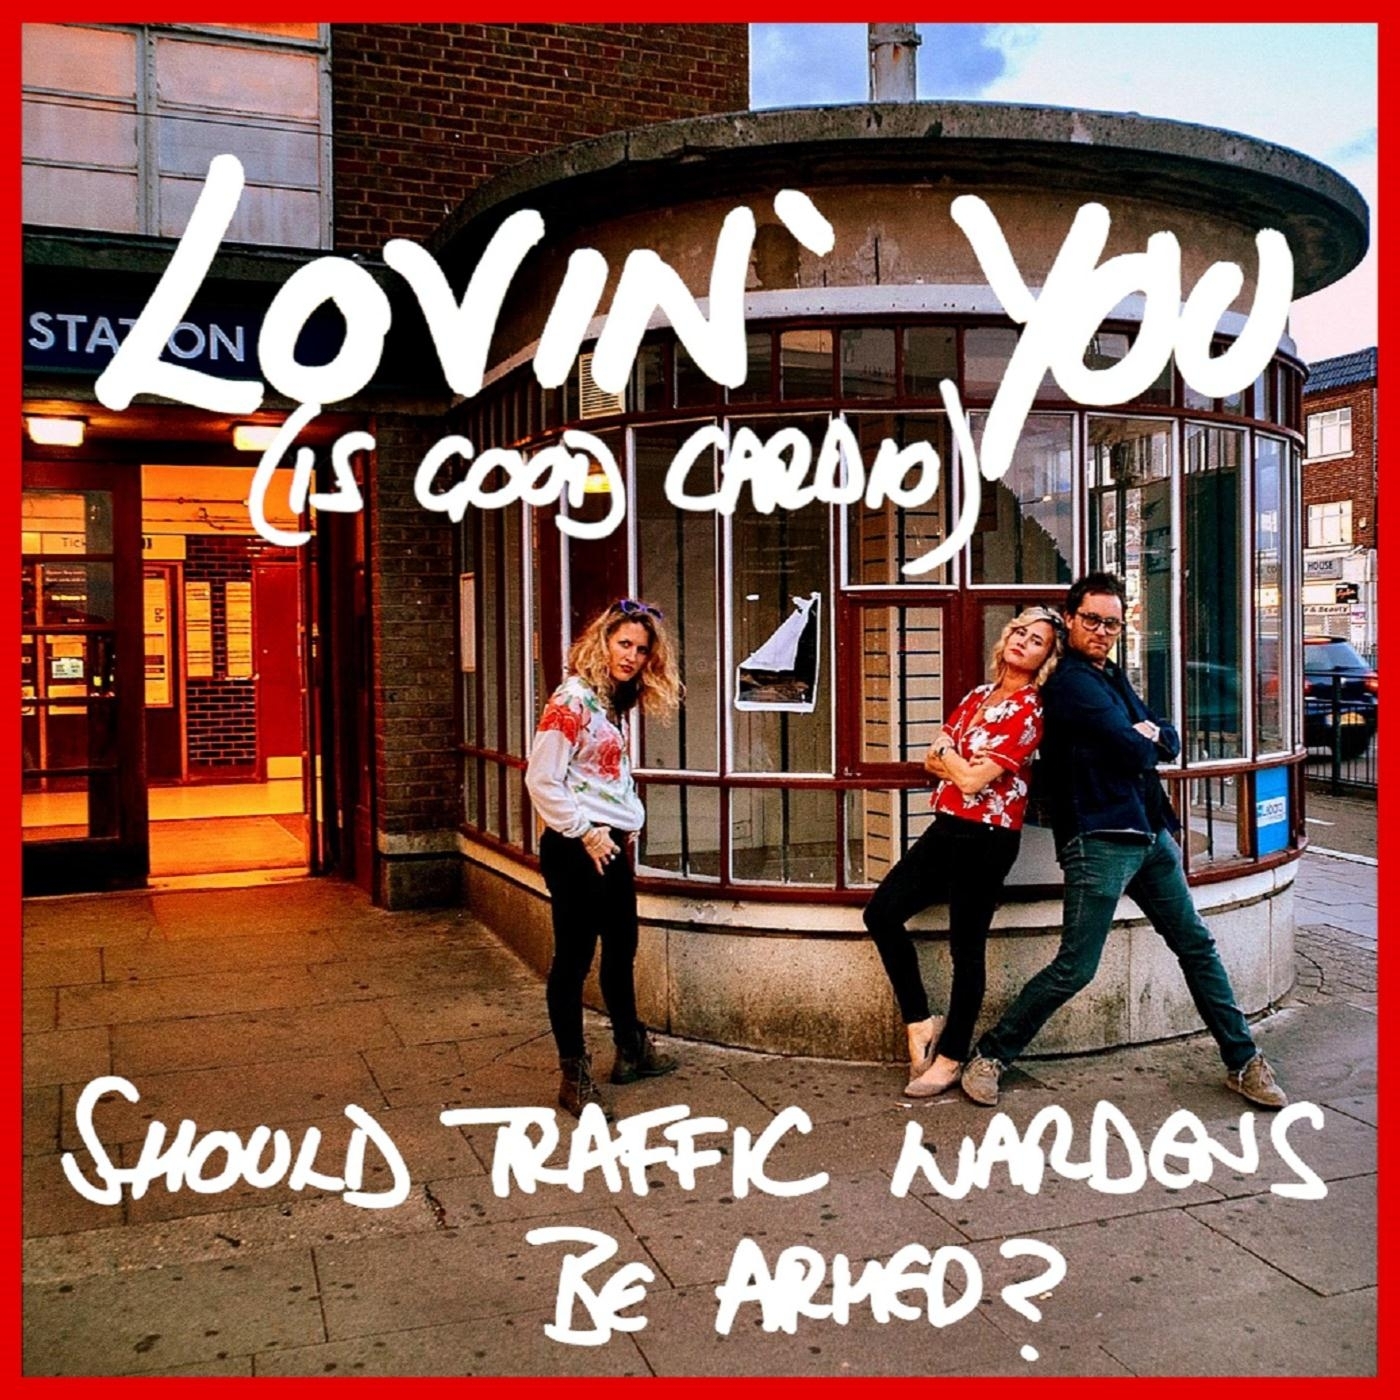 Loving You (Is Good Cardio) / Should Traffic Wardens Be Armed?